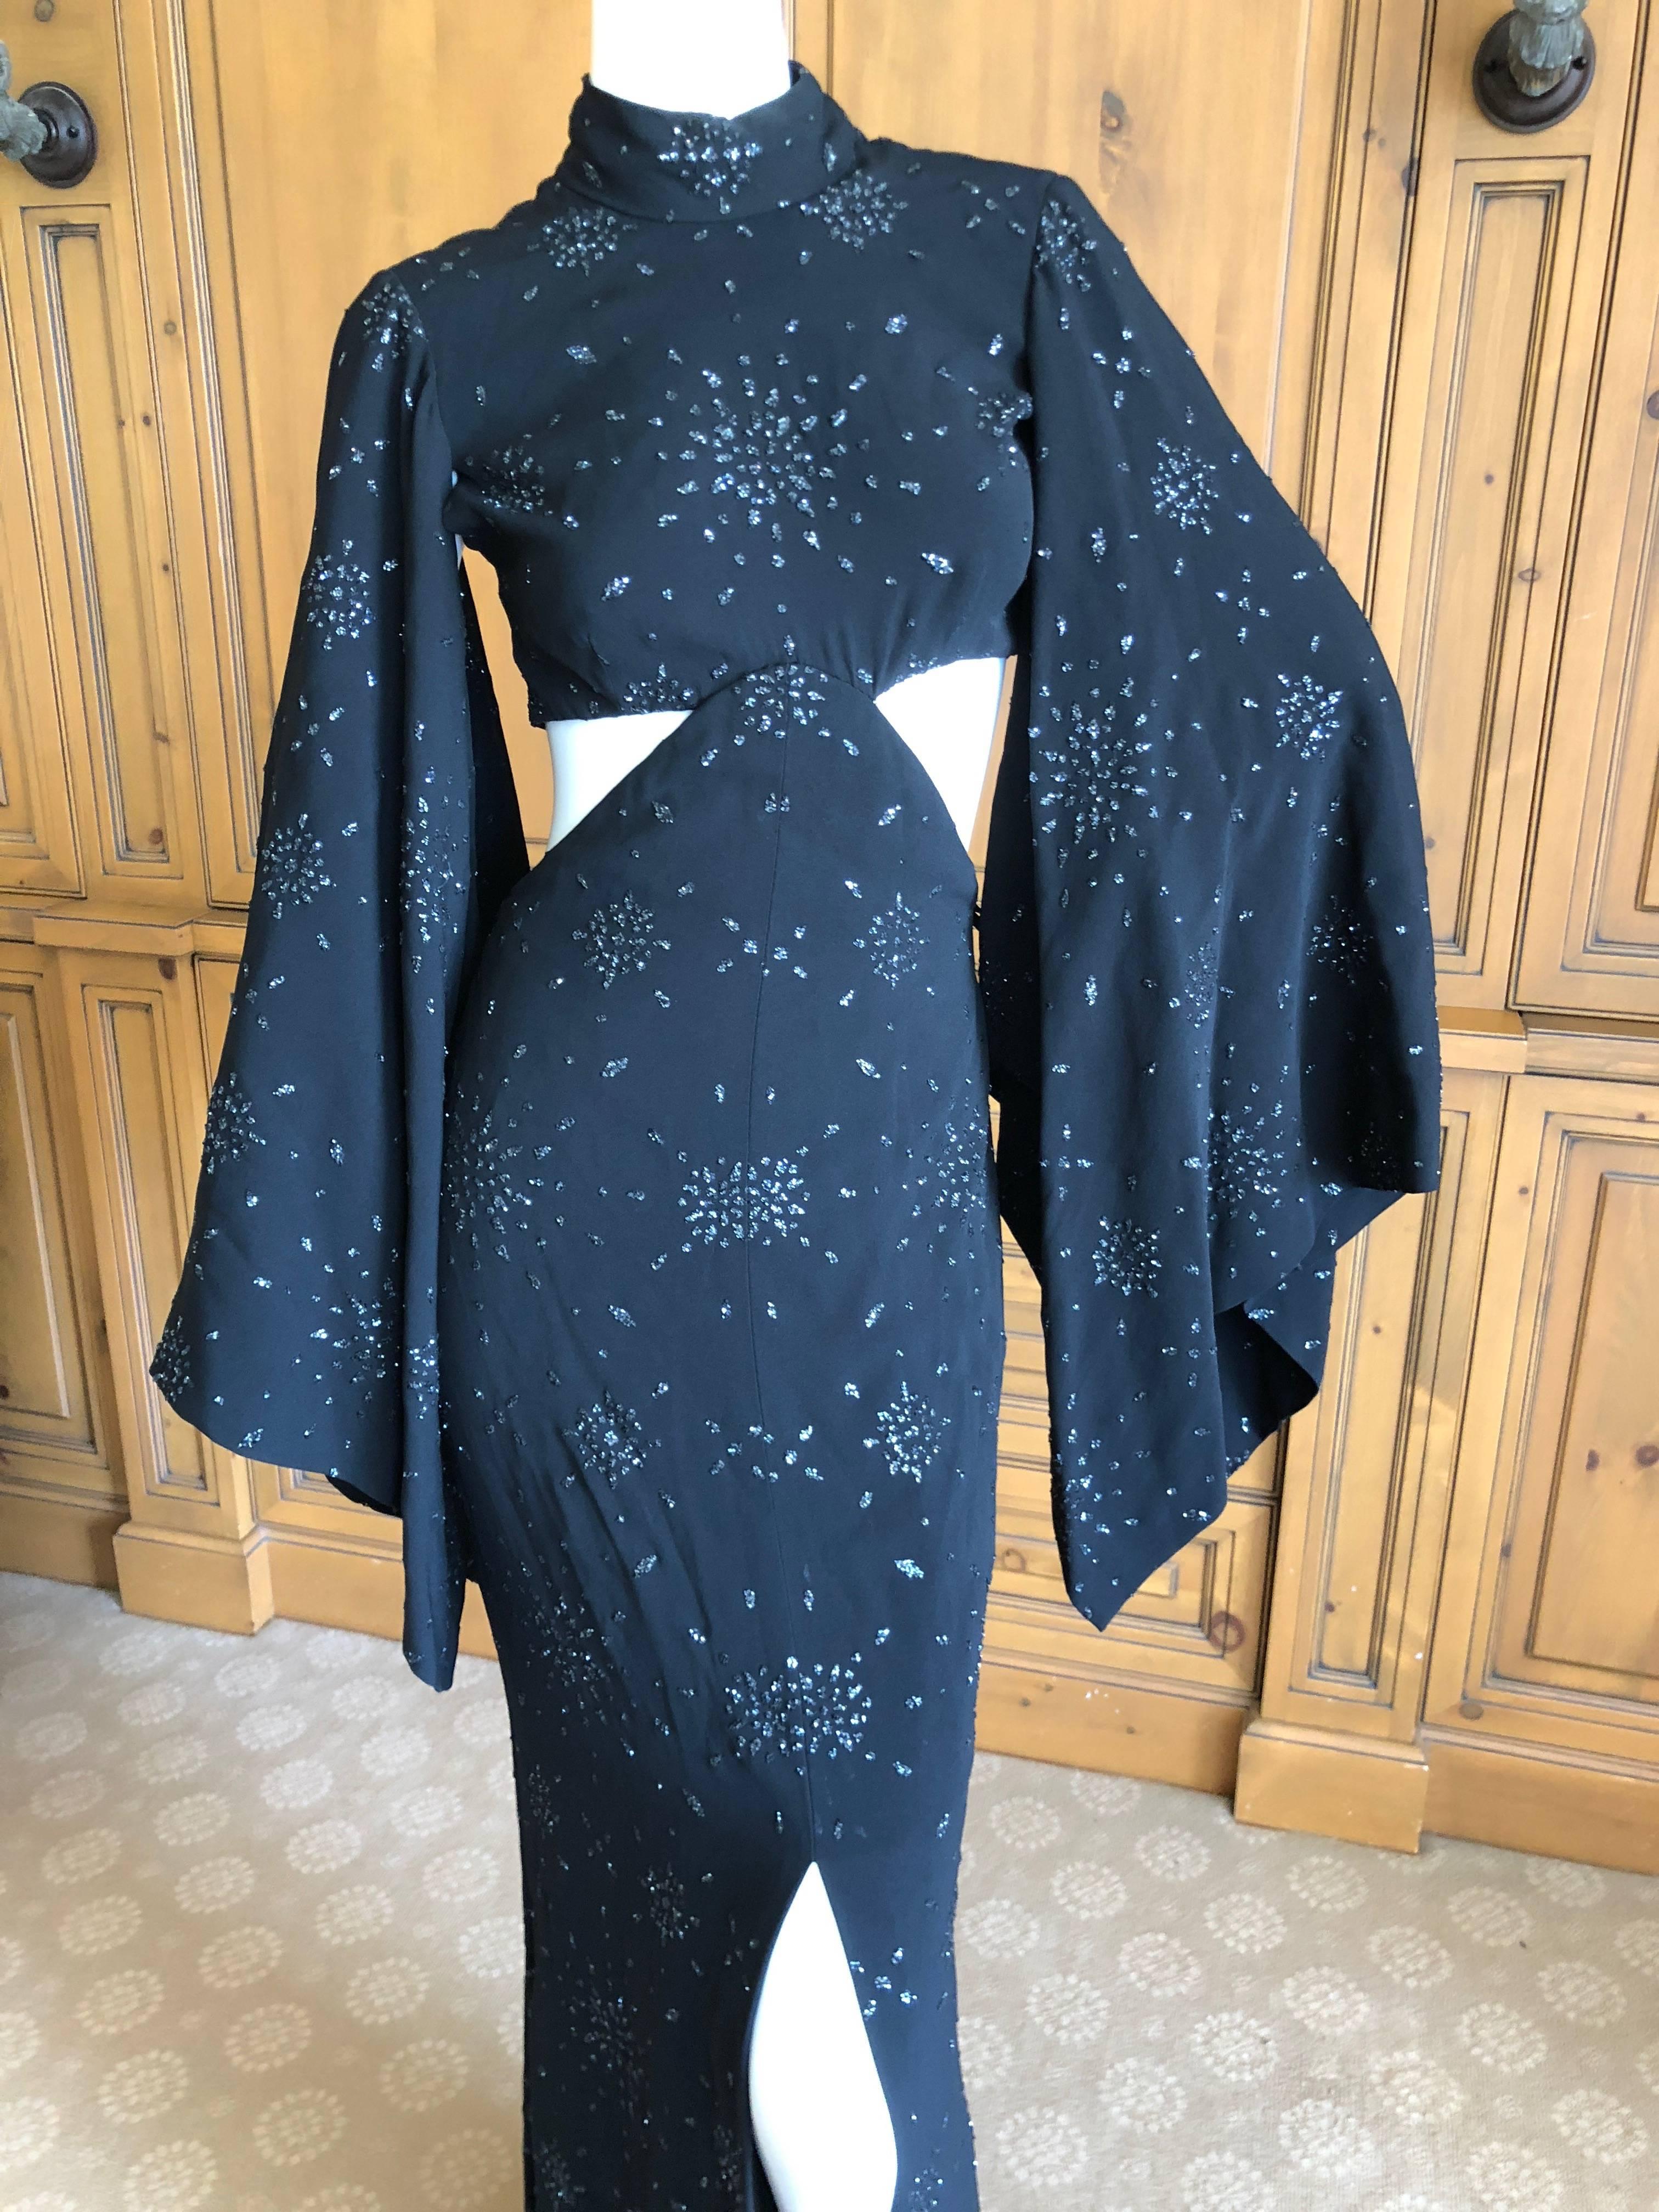 Cardinali 1970's Seductive Glittering Cut Out Evening Dress with Kimono Sleeves For Sale 2